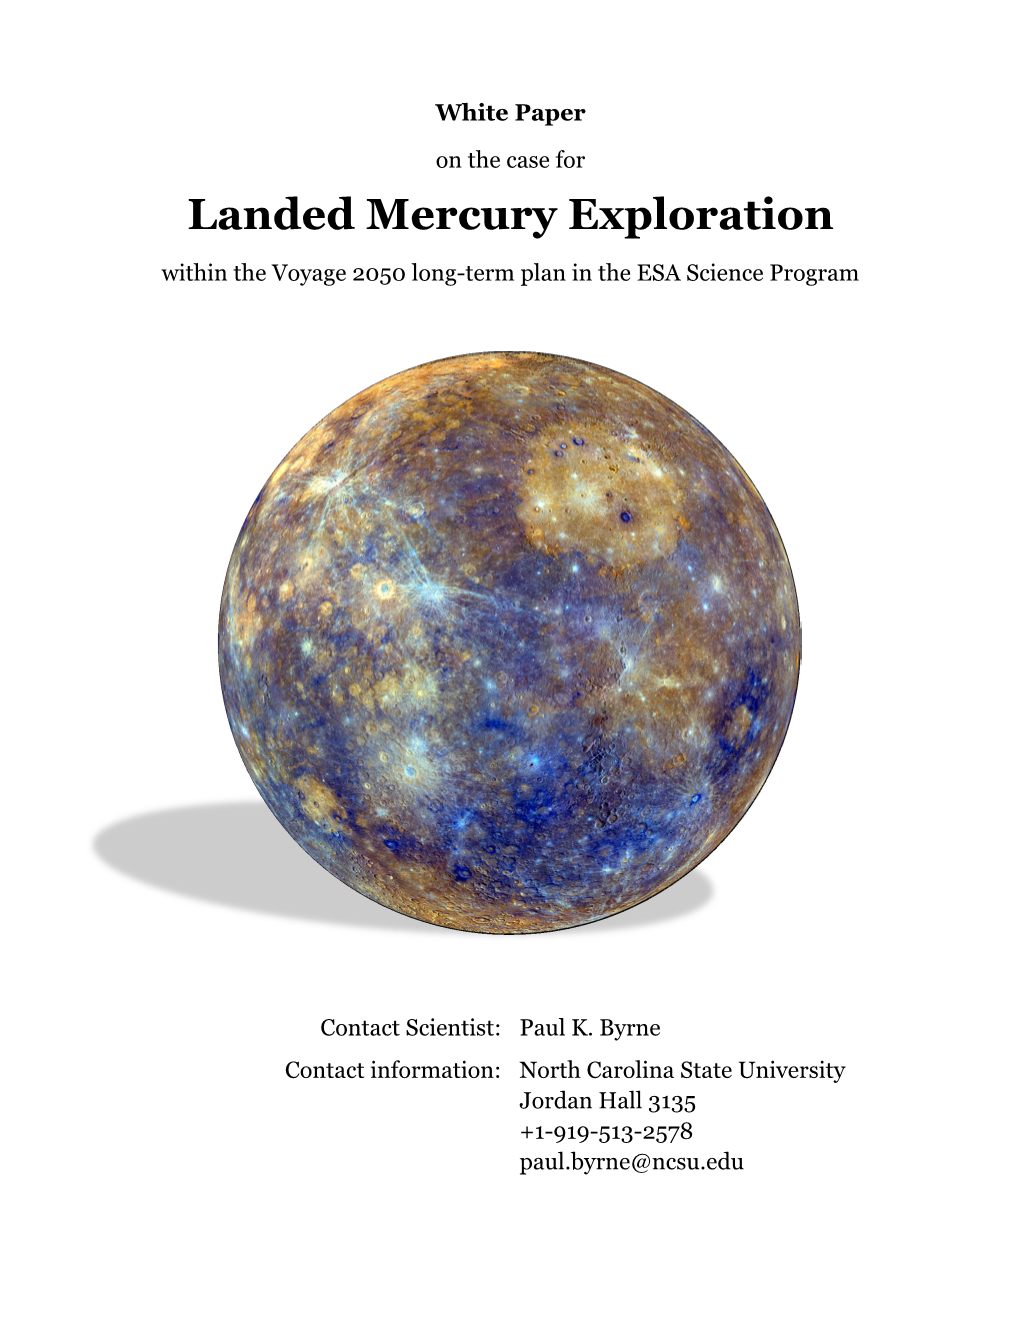 White Paper on the Case for Landed Mercury Exploration Within The